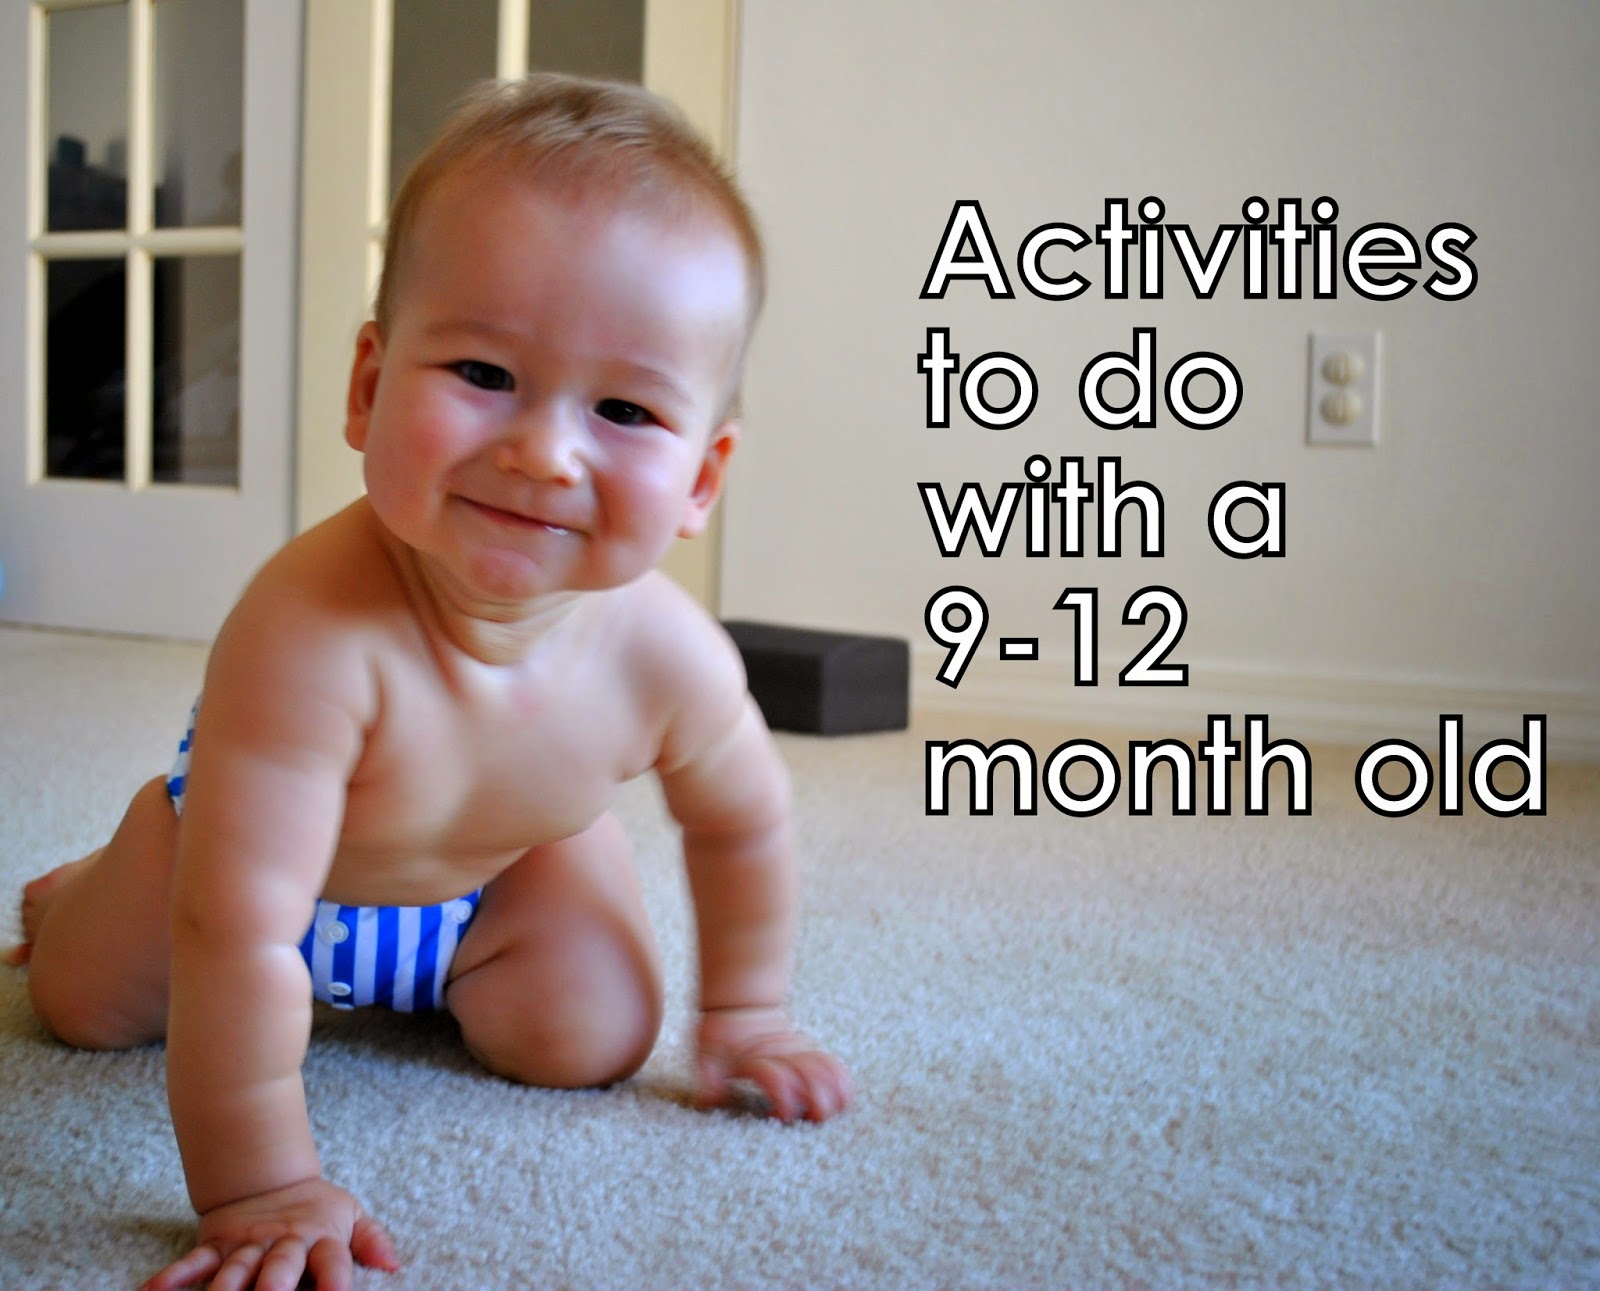 Diary of a Fit Mommy: Activities To Do With a 9-12 Month Old